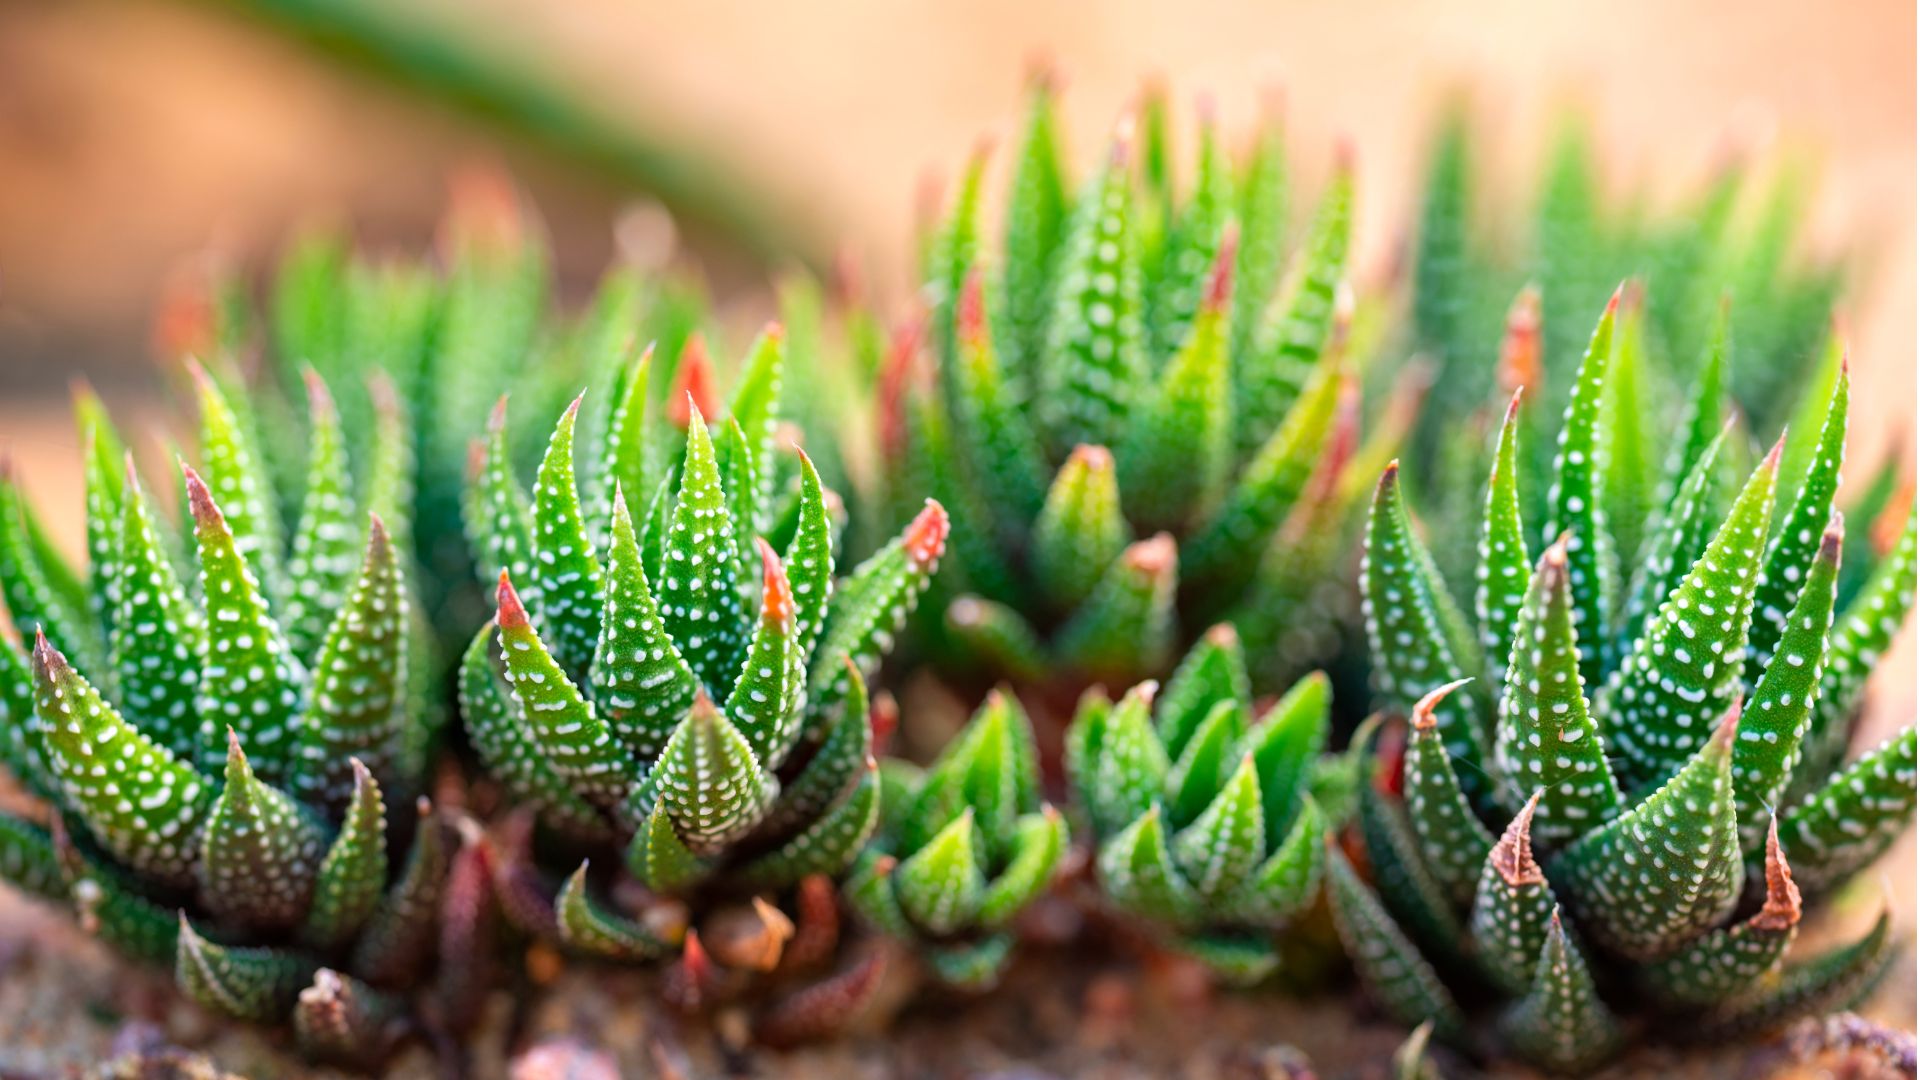 Succulent plant with green leaves and pink tips